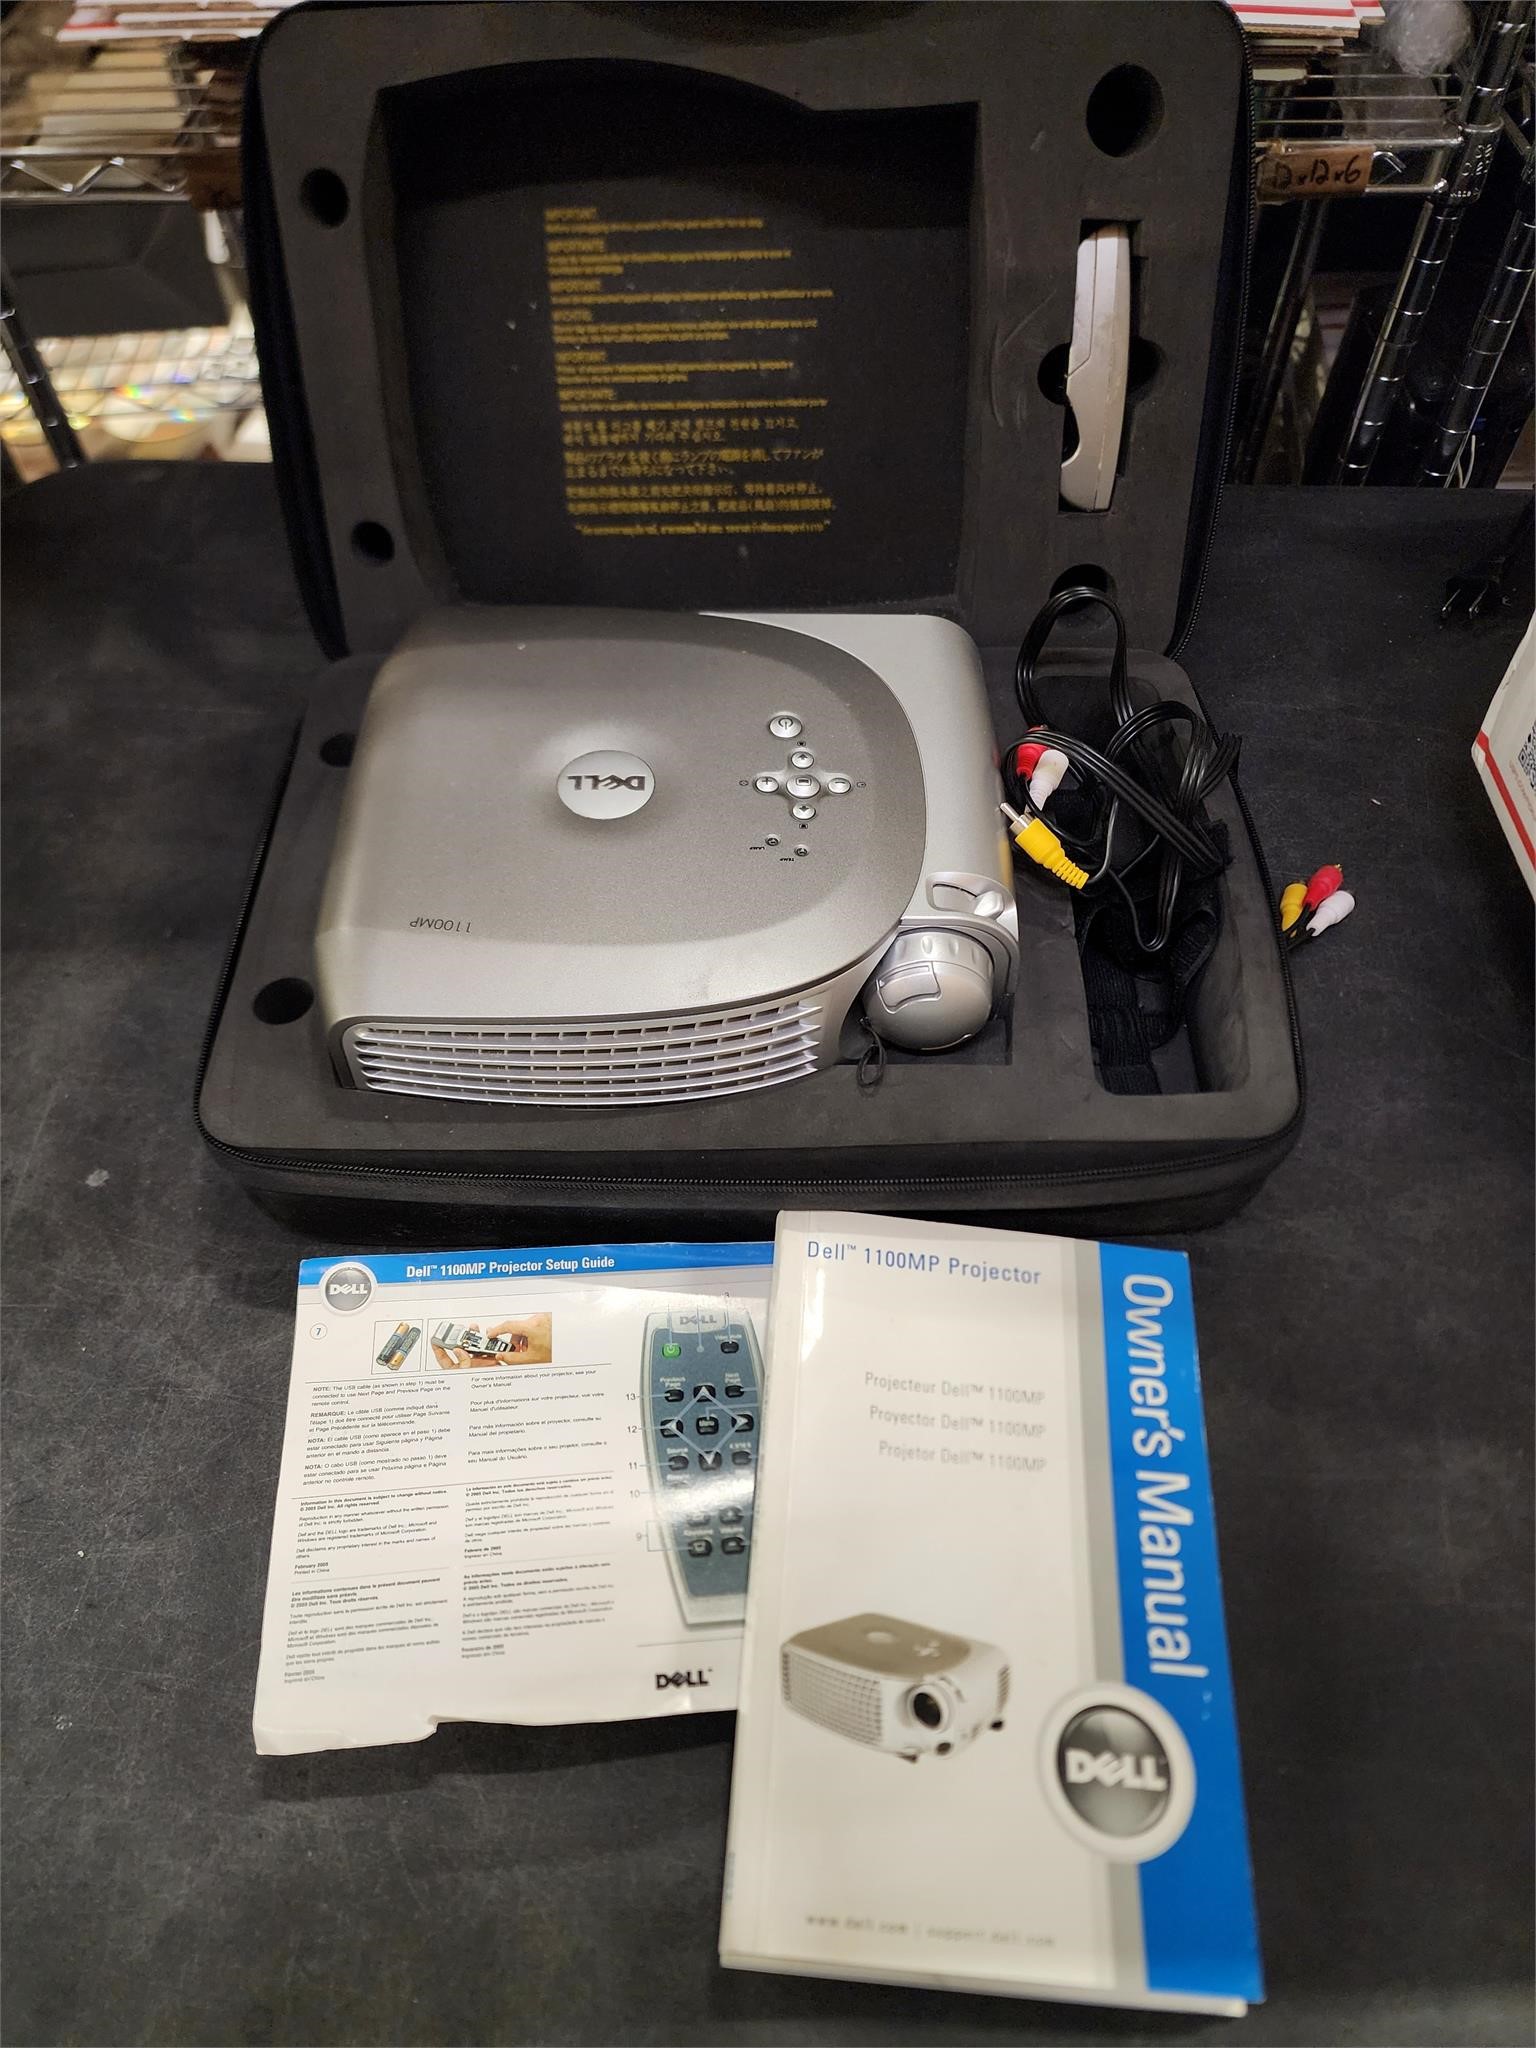 Dell 1100MP projector in case with accessories